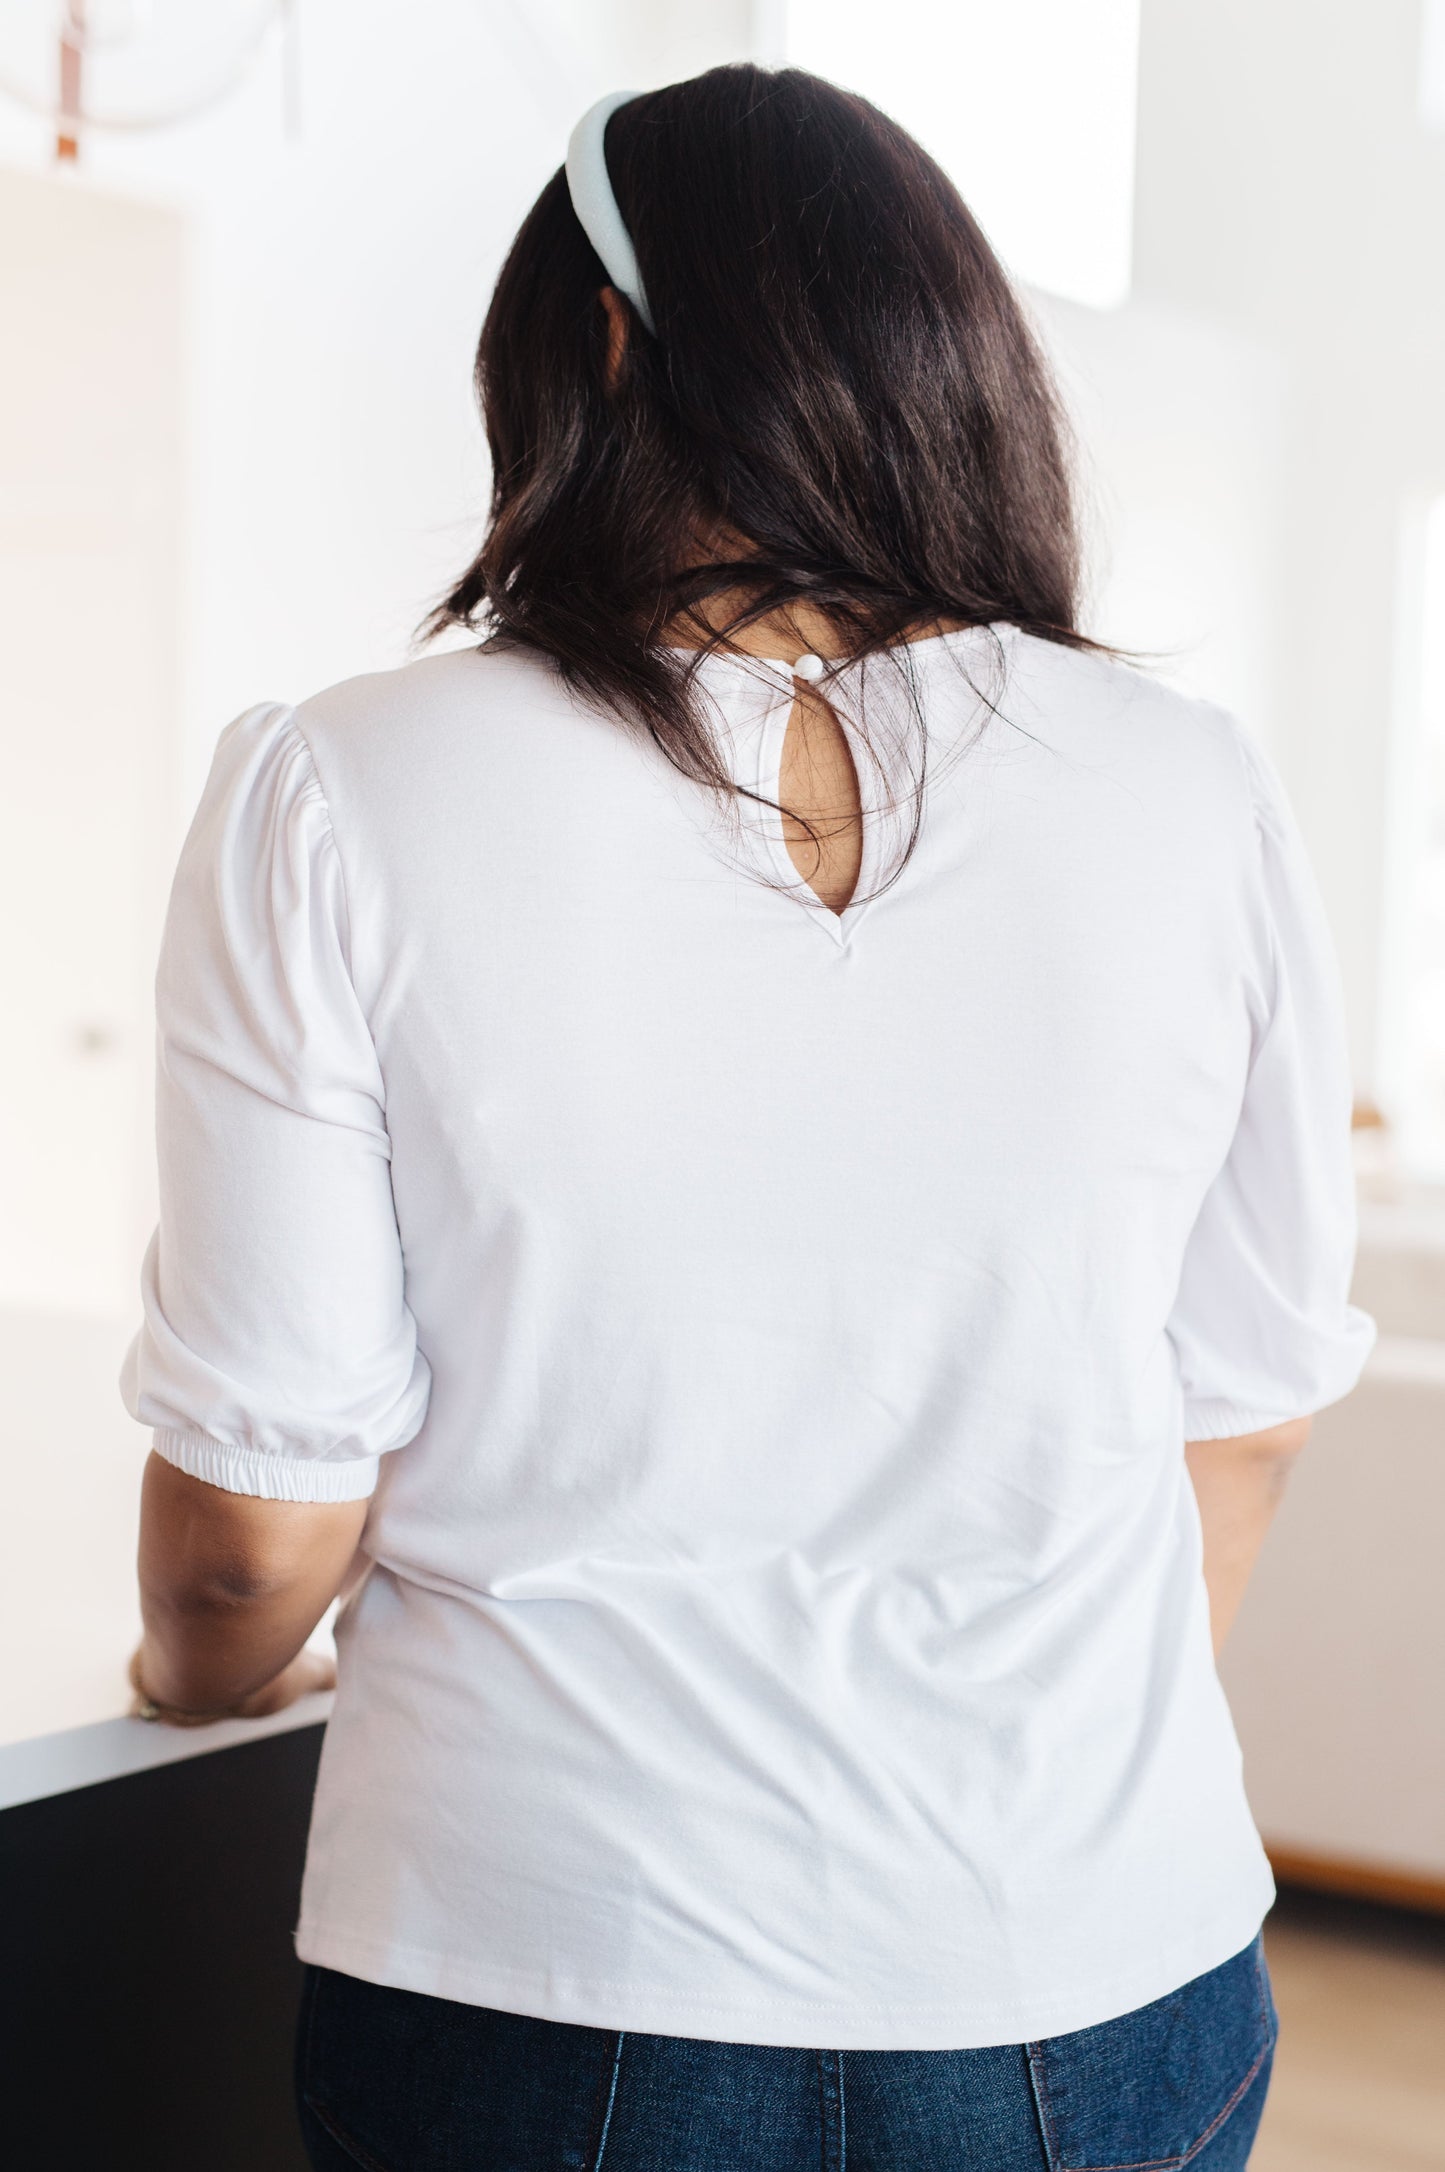 Look your best in the timelessly chic New Days Ahead White Blouse. Featuring a puff sleeve, a keyhole detail on the back, a classic white hue, and a comfortable jersey knit, this top is sure to be your new go-to for any occasion. S - 3X